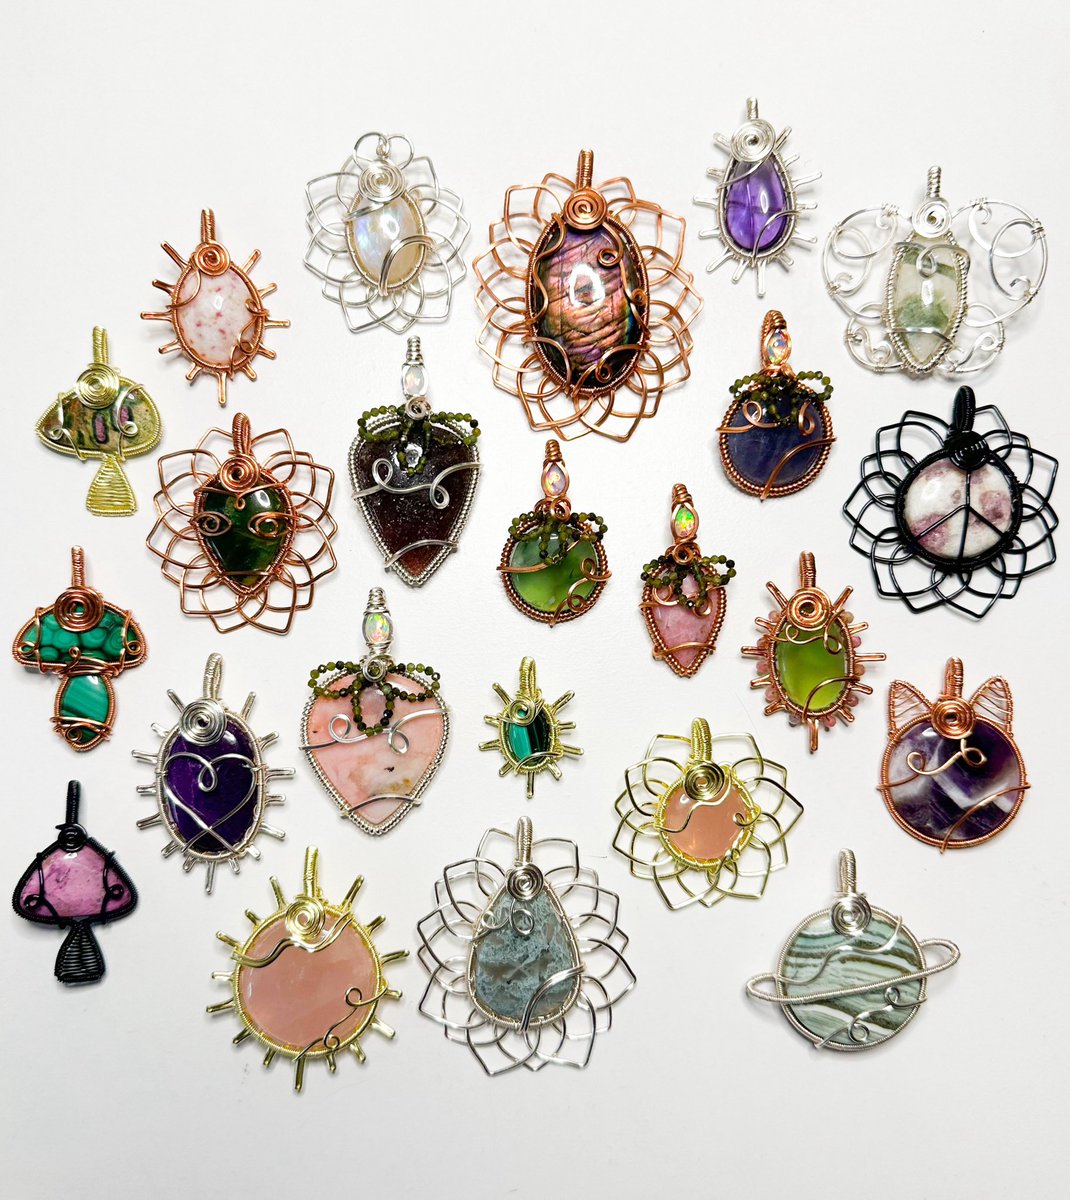 the crystals 🪷🧚🏼🌷🍓 the pendants “fairy princess” collection coming Friday May 10th at 8pm eastern time <3